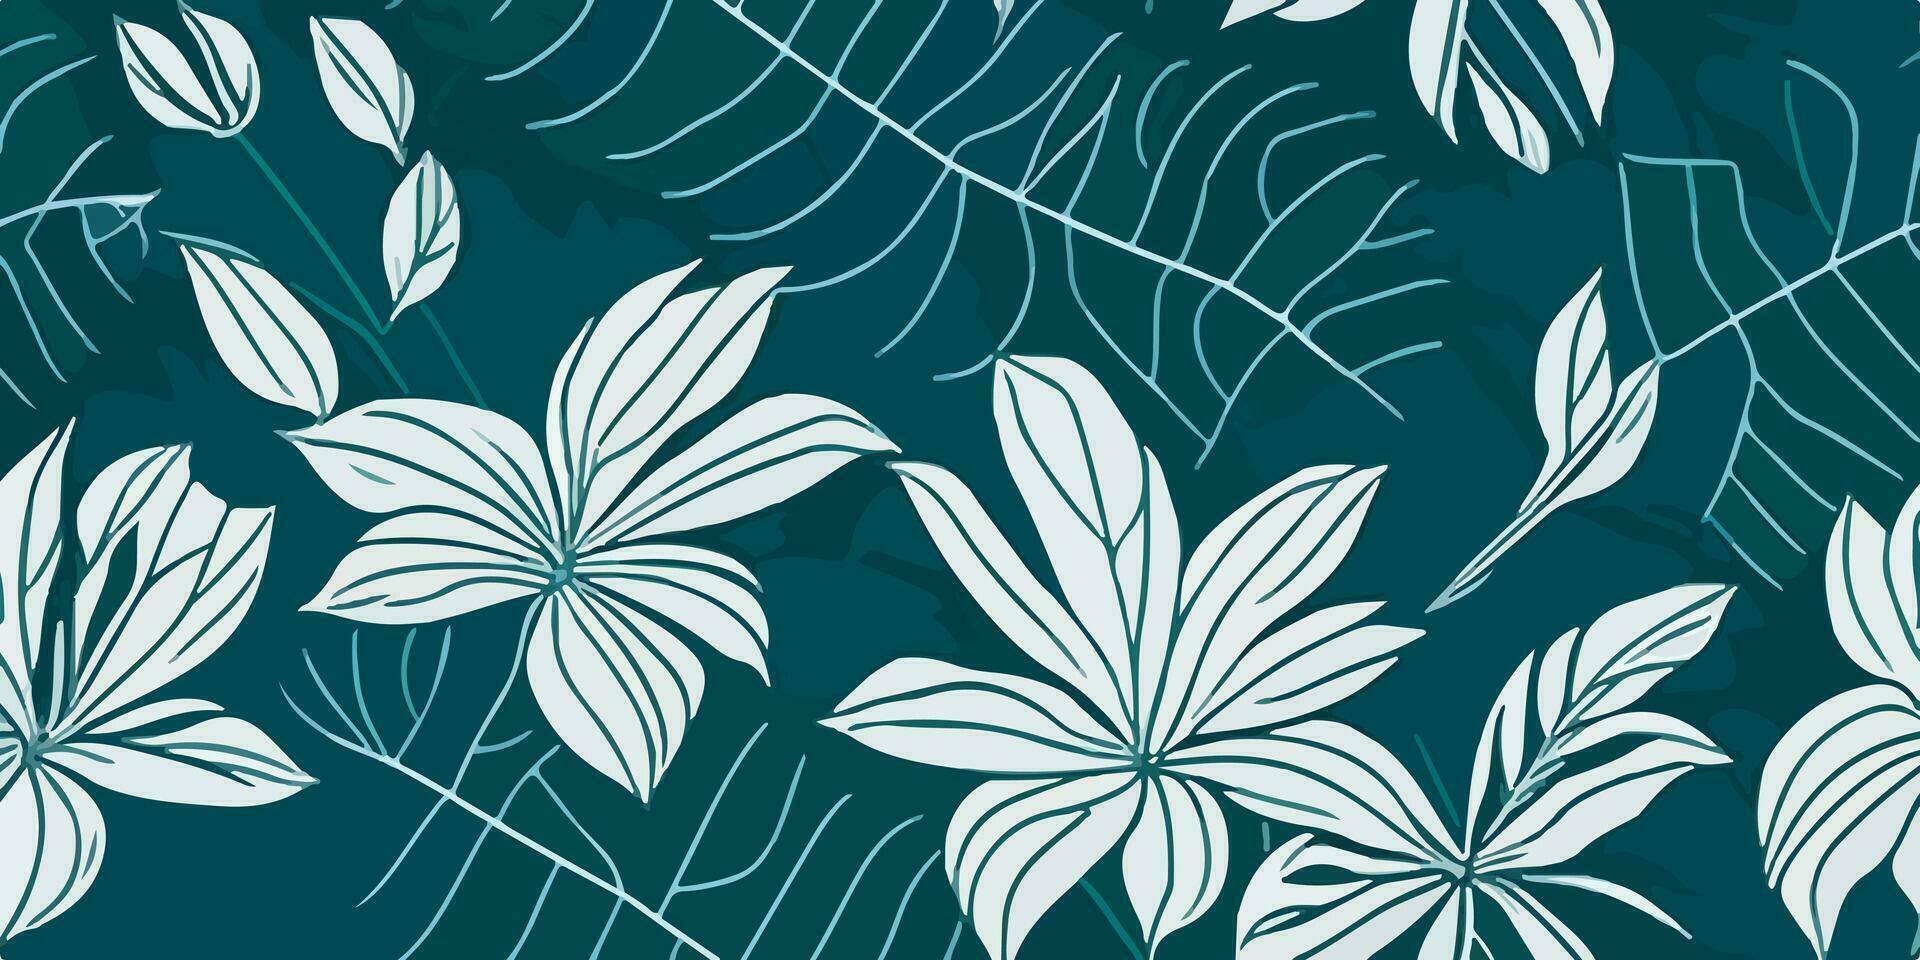 Modern Tropical Chic. Incorporating Frangipani Patterns into Contemporary Designs vector